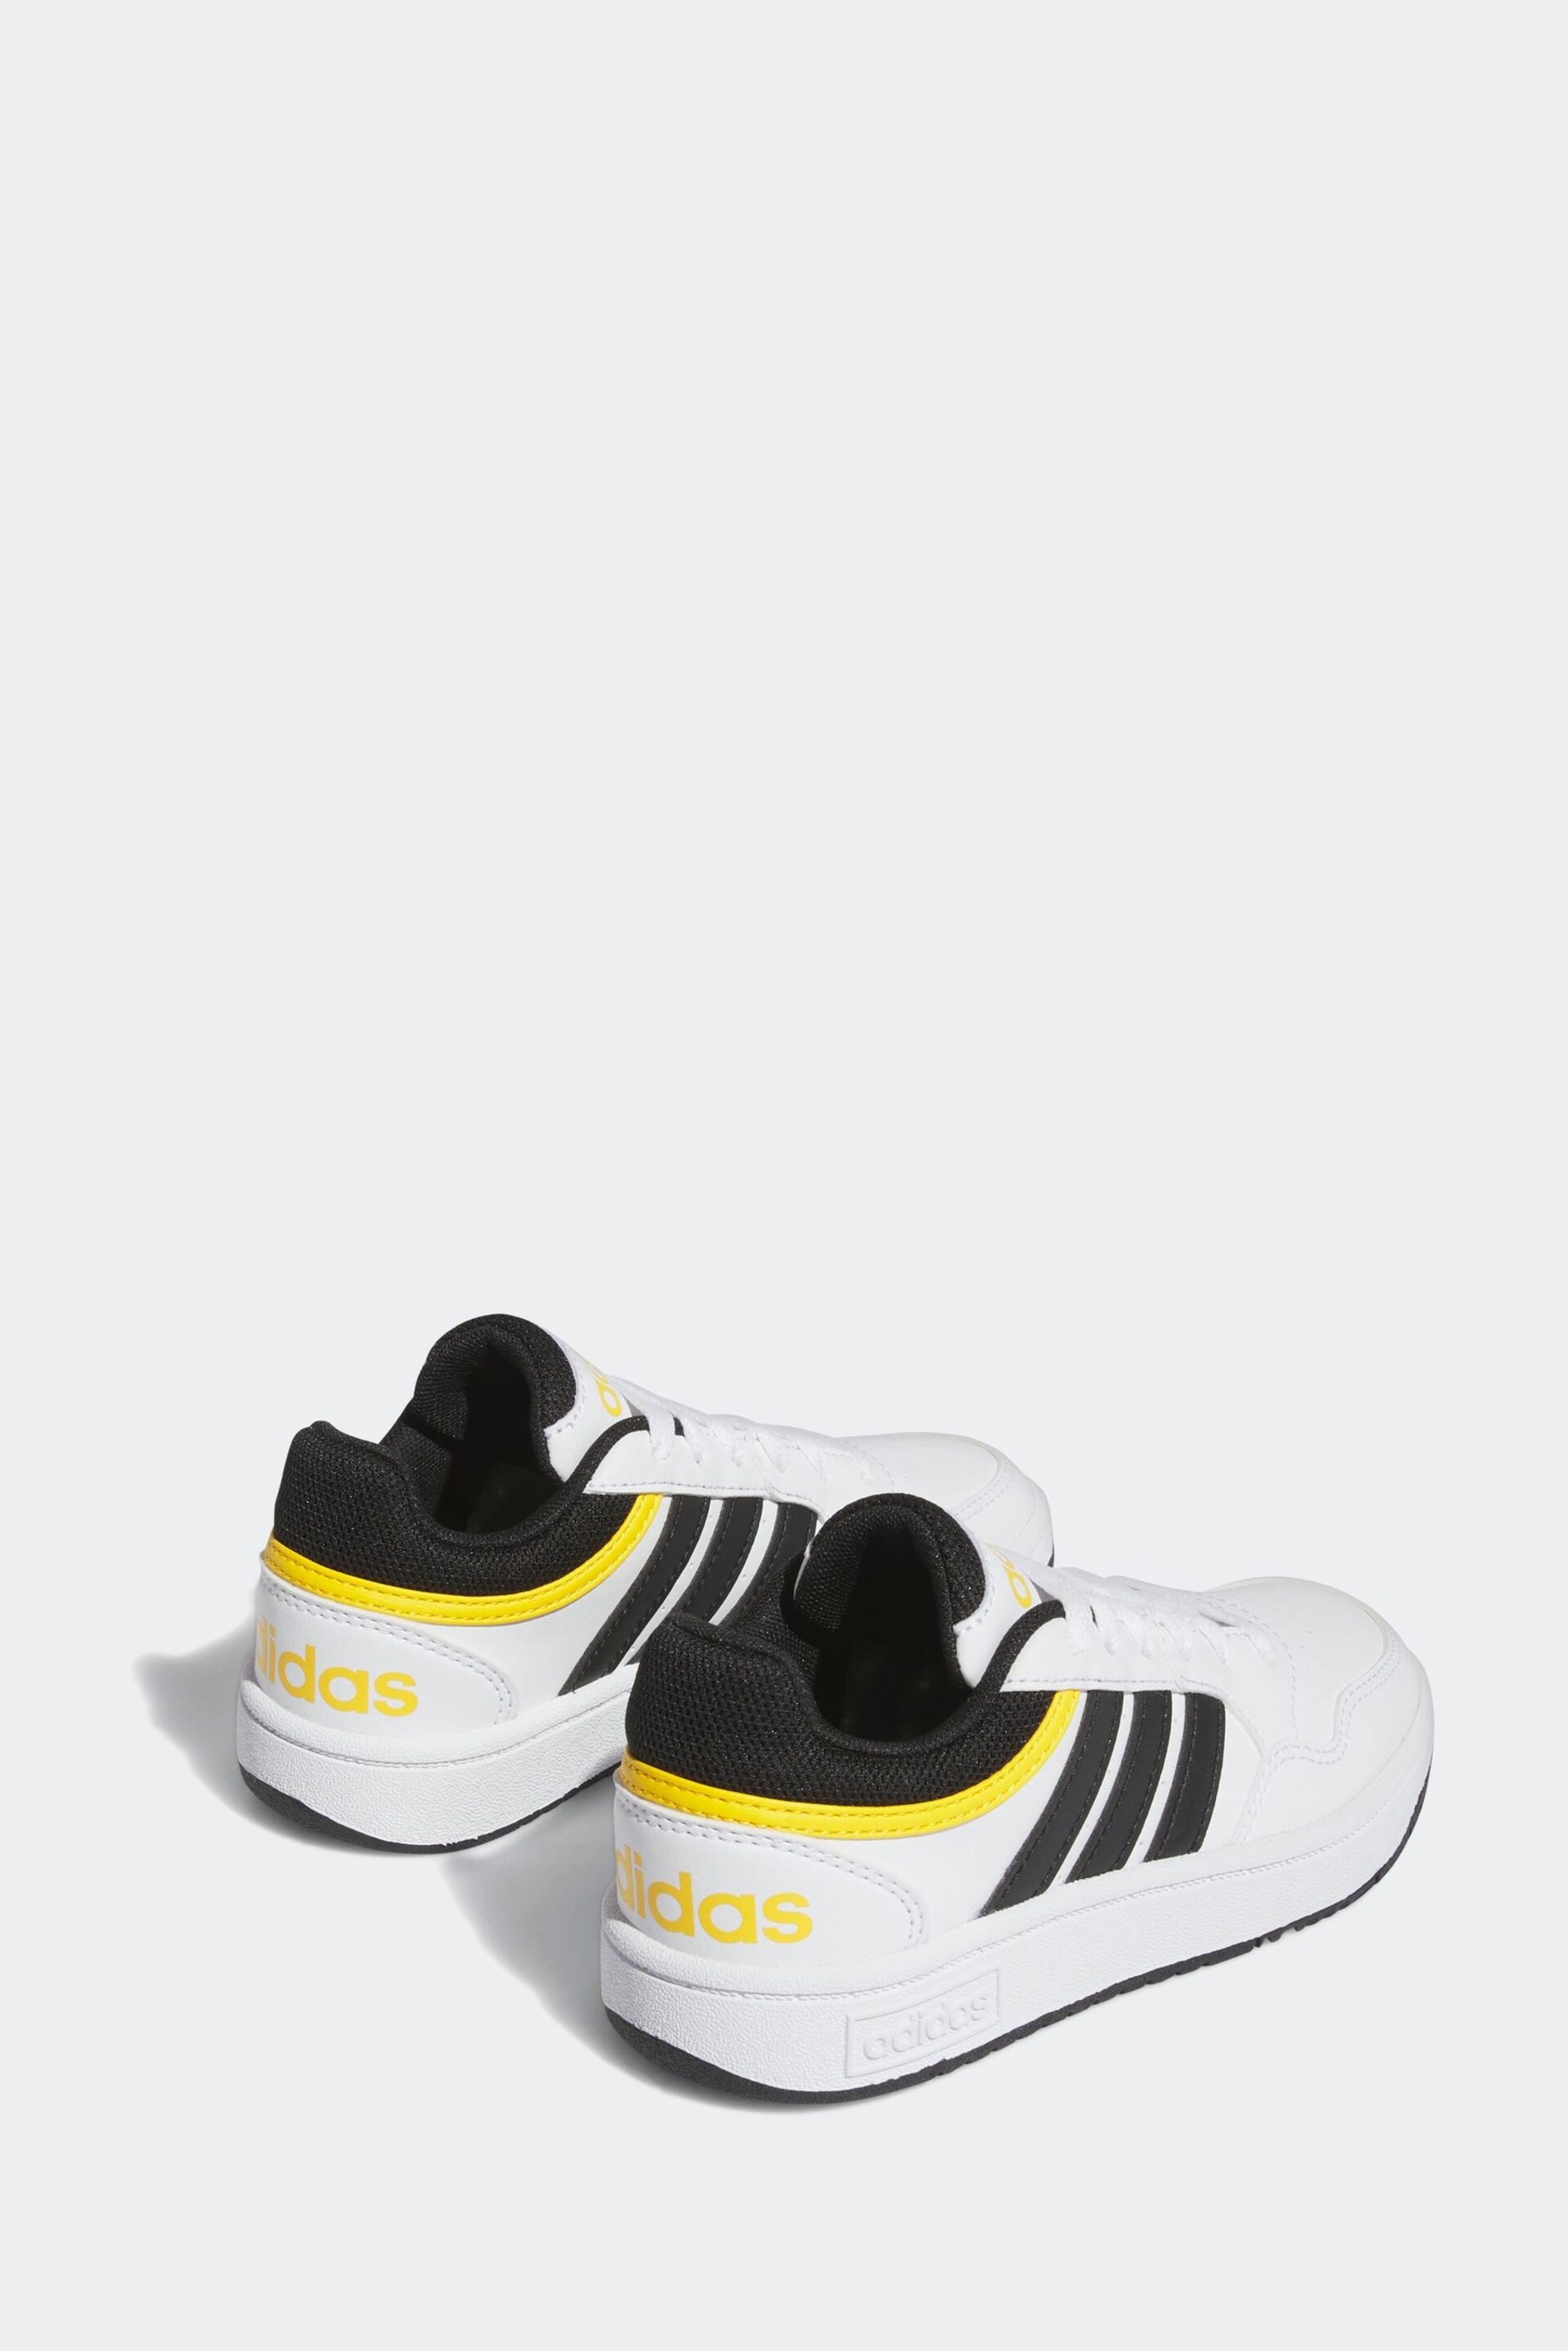 adidas Yellow/Black Hoops Trainers - Image 4 of 8